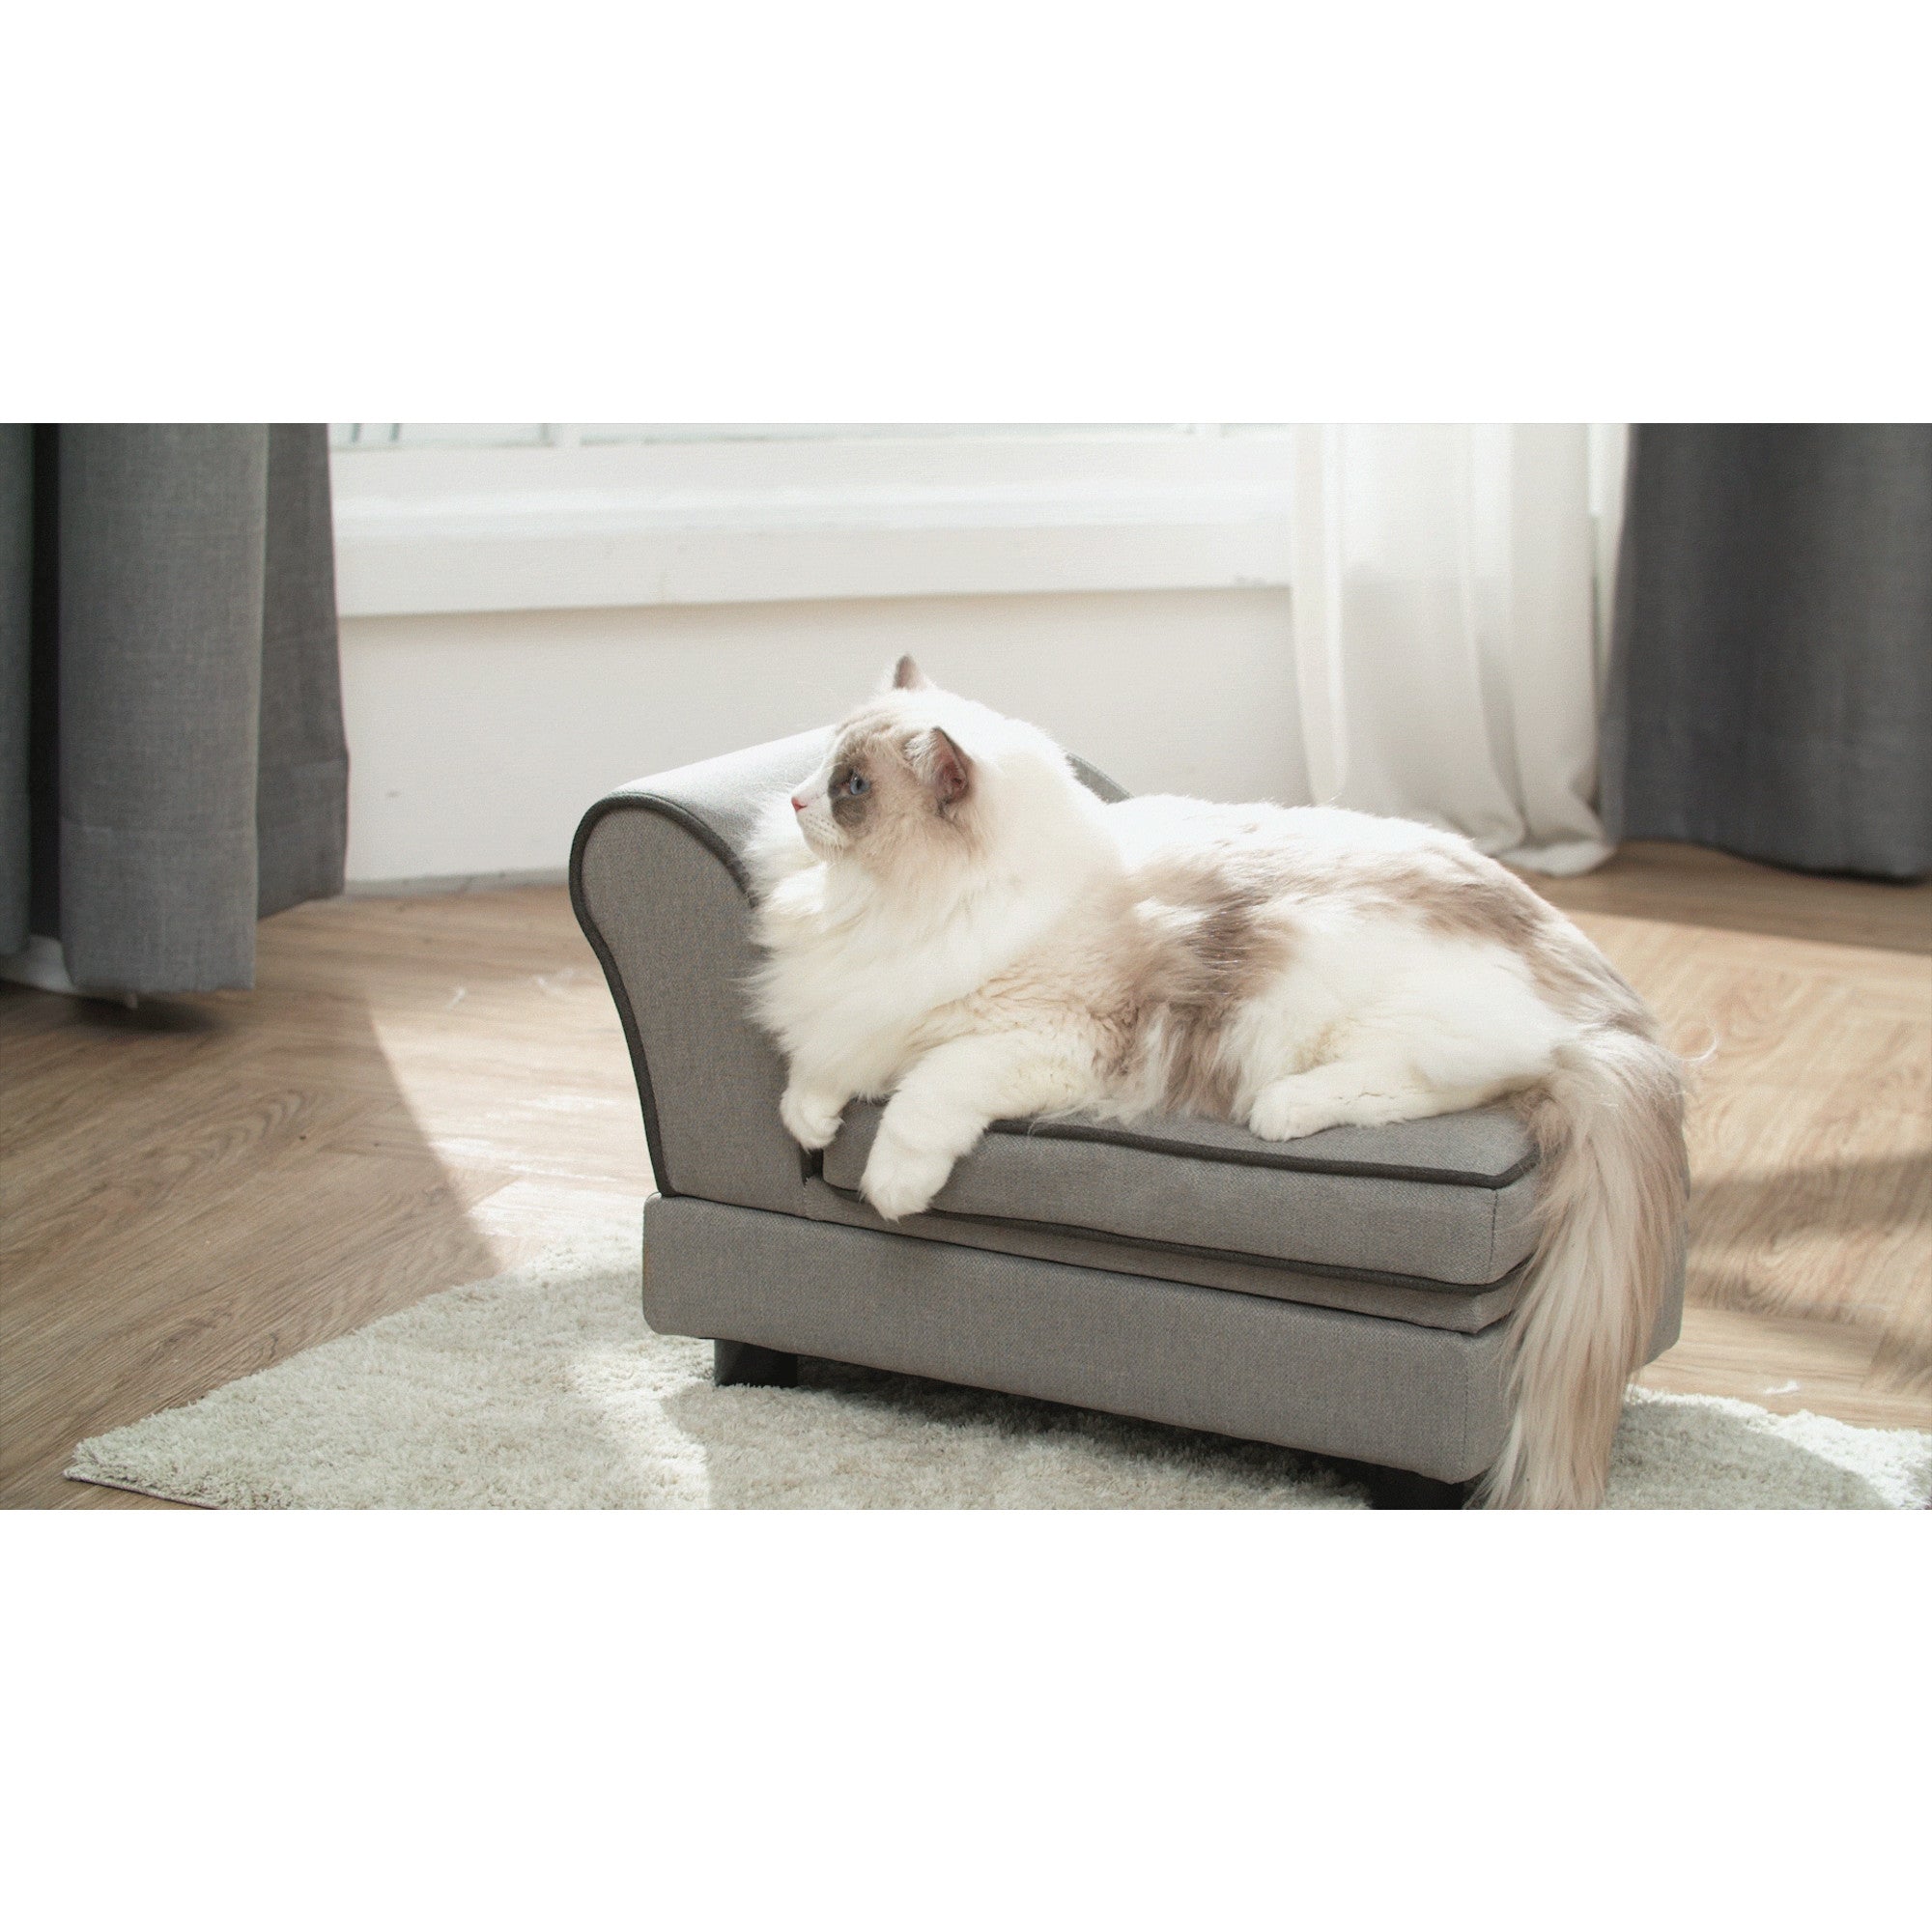 Teamson Pets Ivan Chaise Lounge Dog Bed with Storage for Cats and Small Dogs, Gray